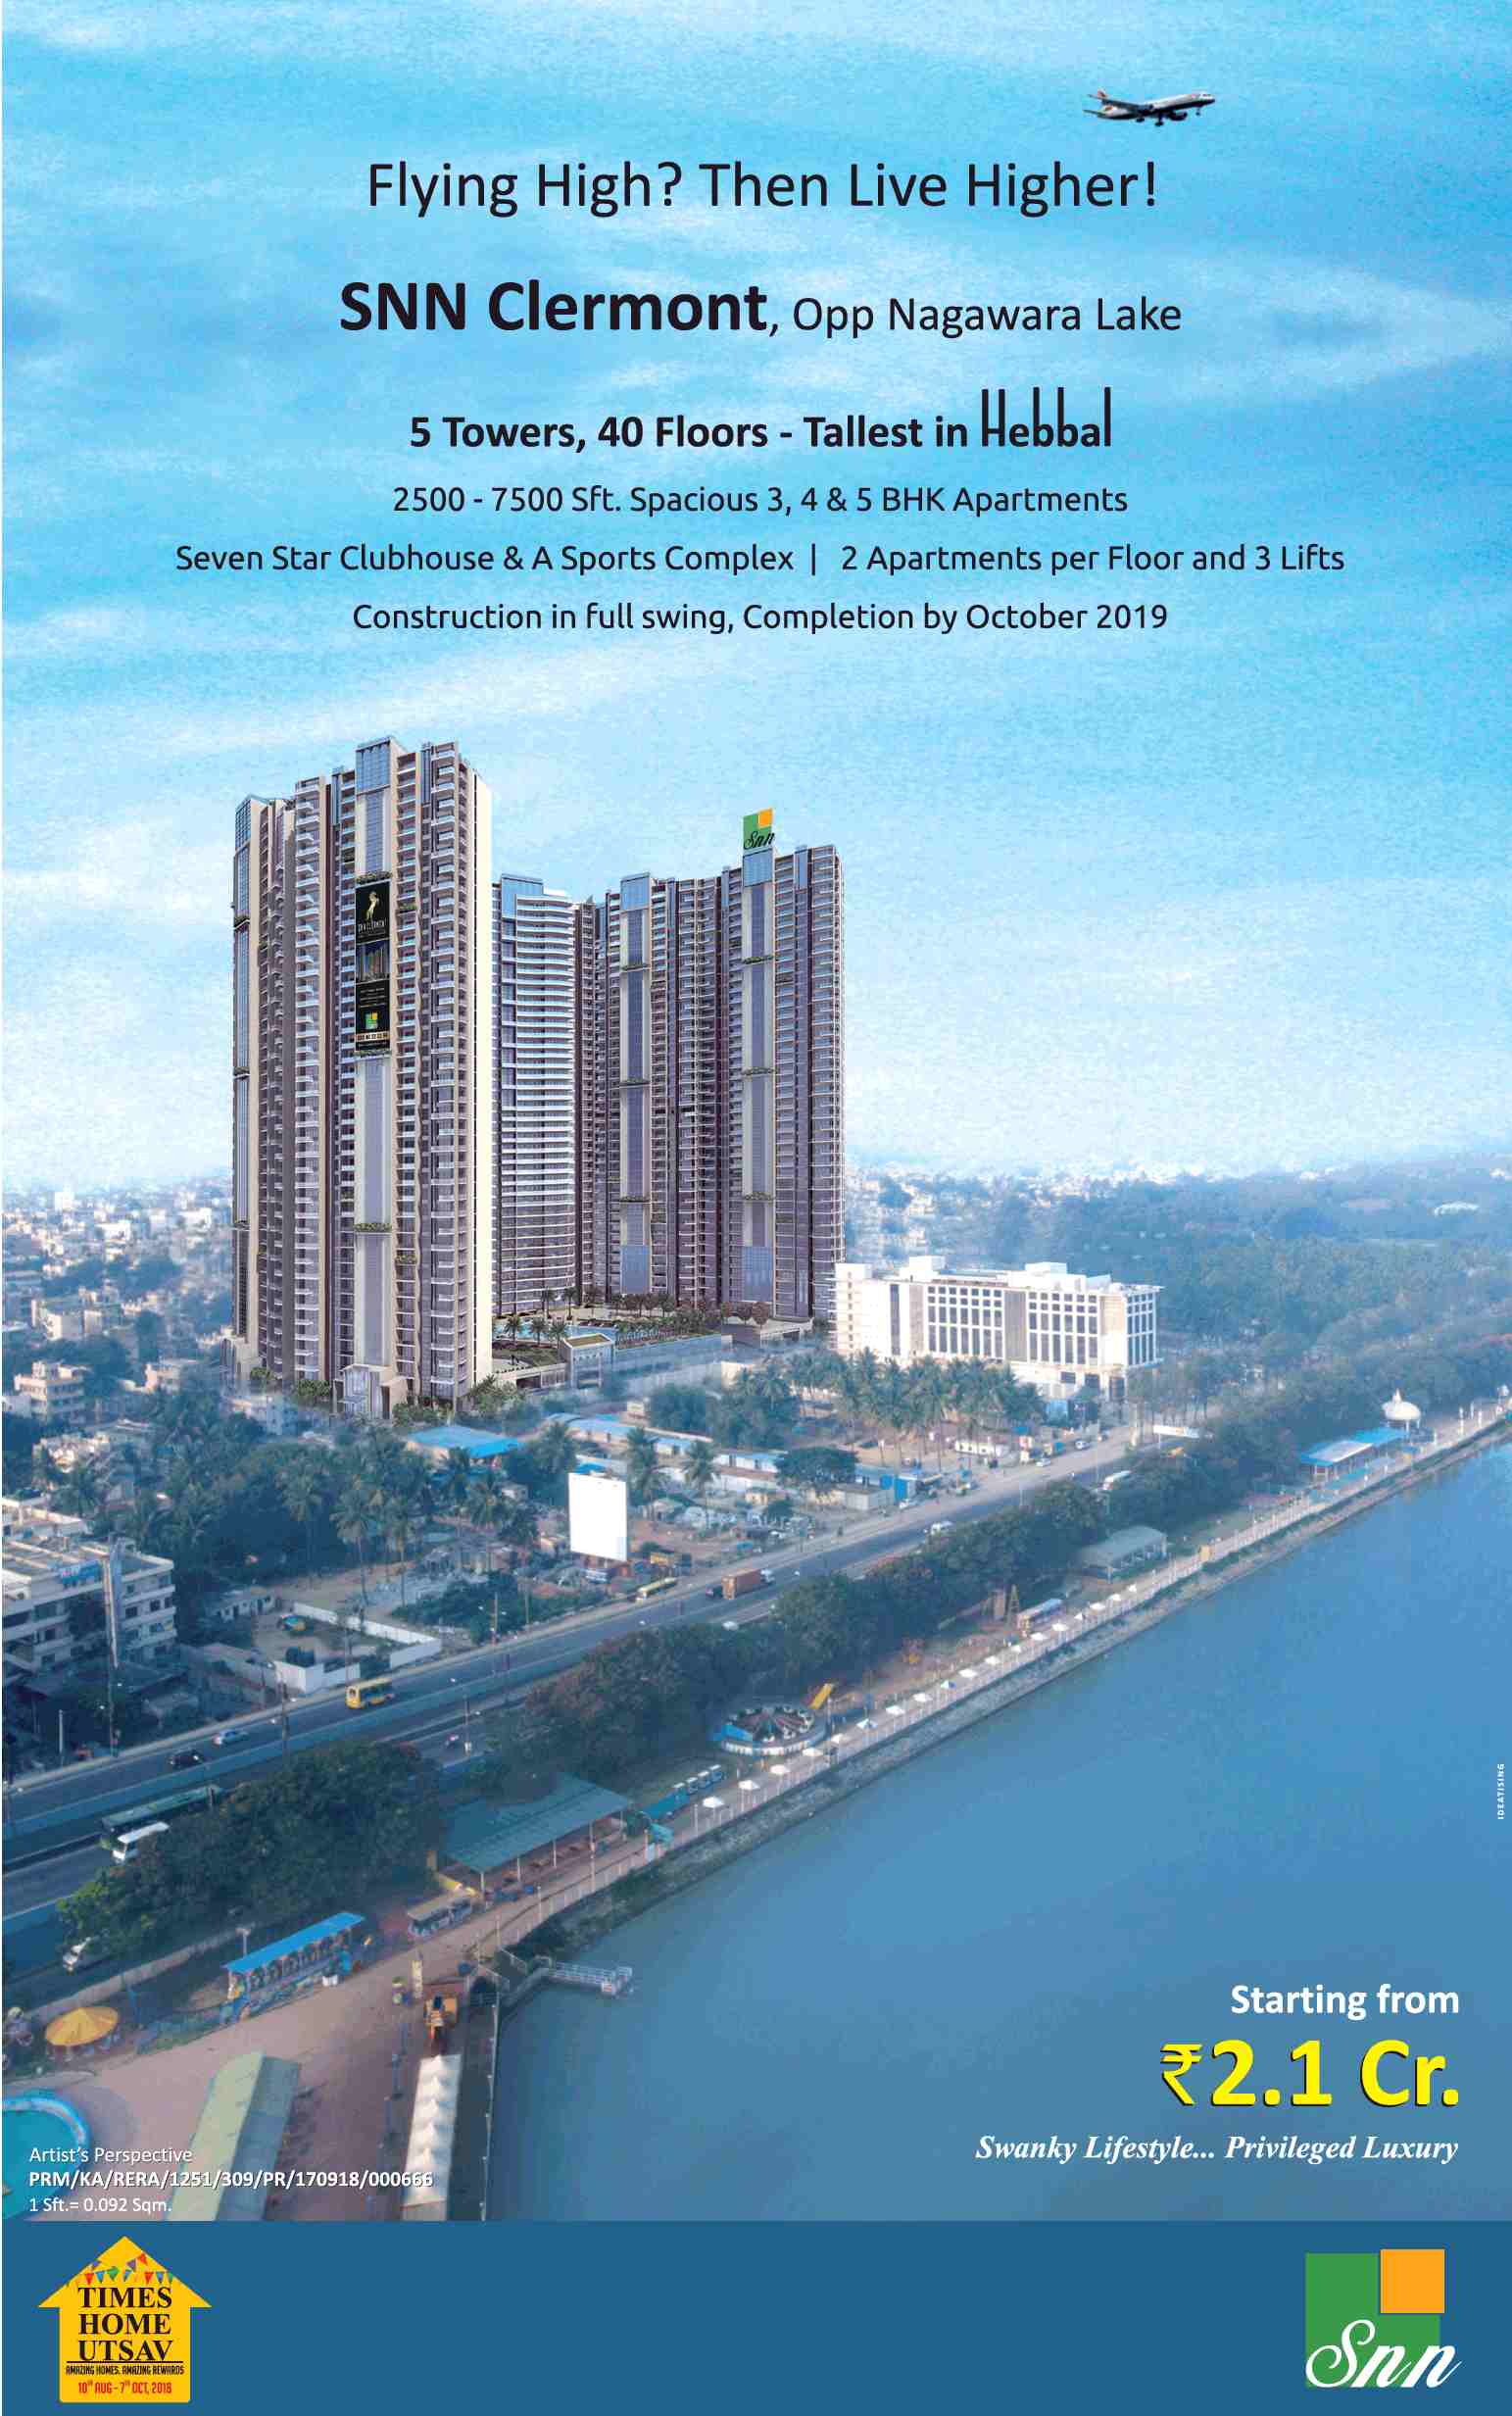 Book spacious apartments with seven star clubhouse @ Rs 2.1 cr at SNN Clermont in Bangalore